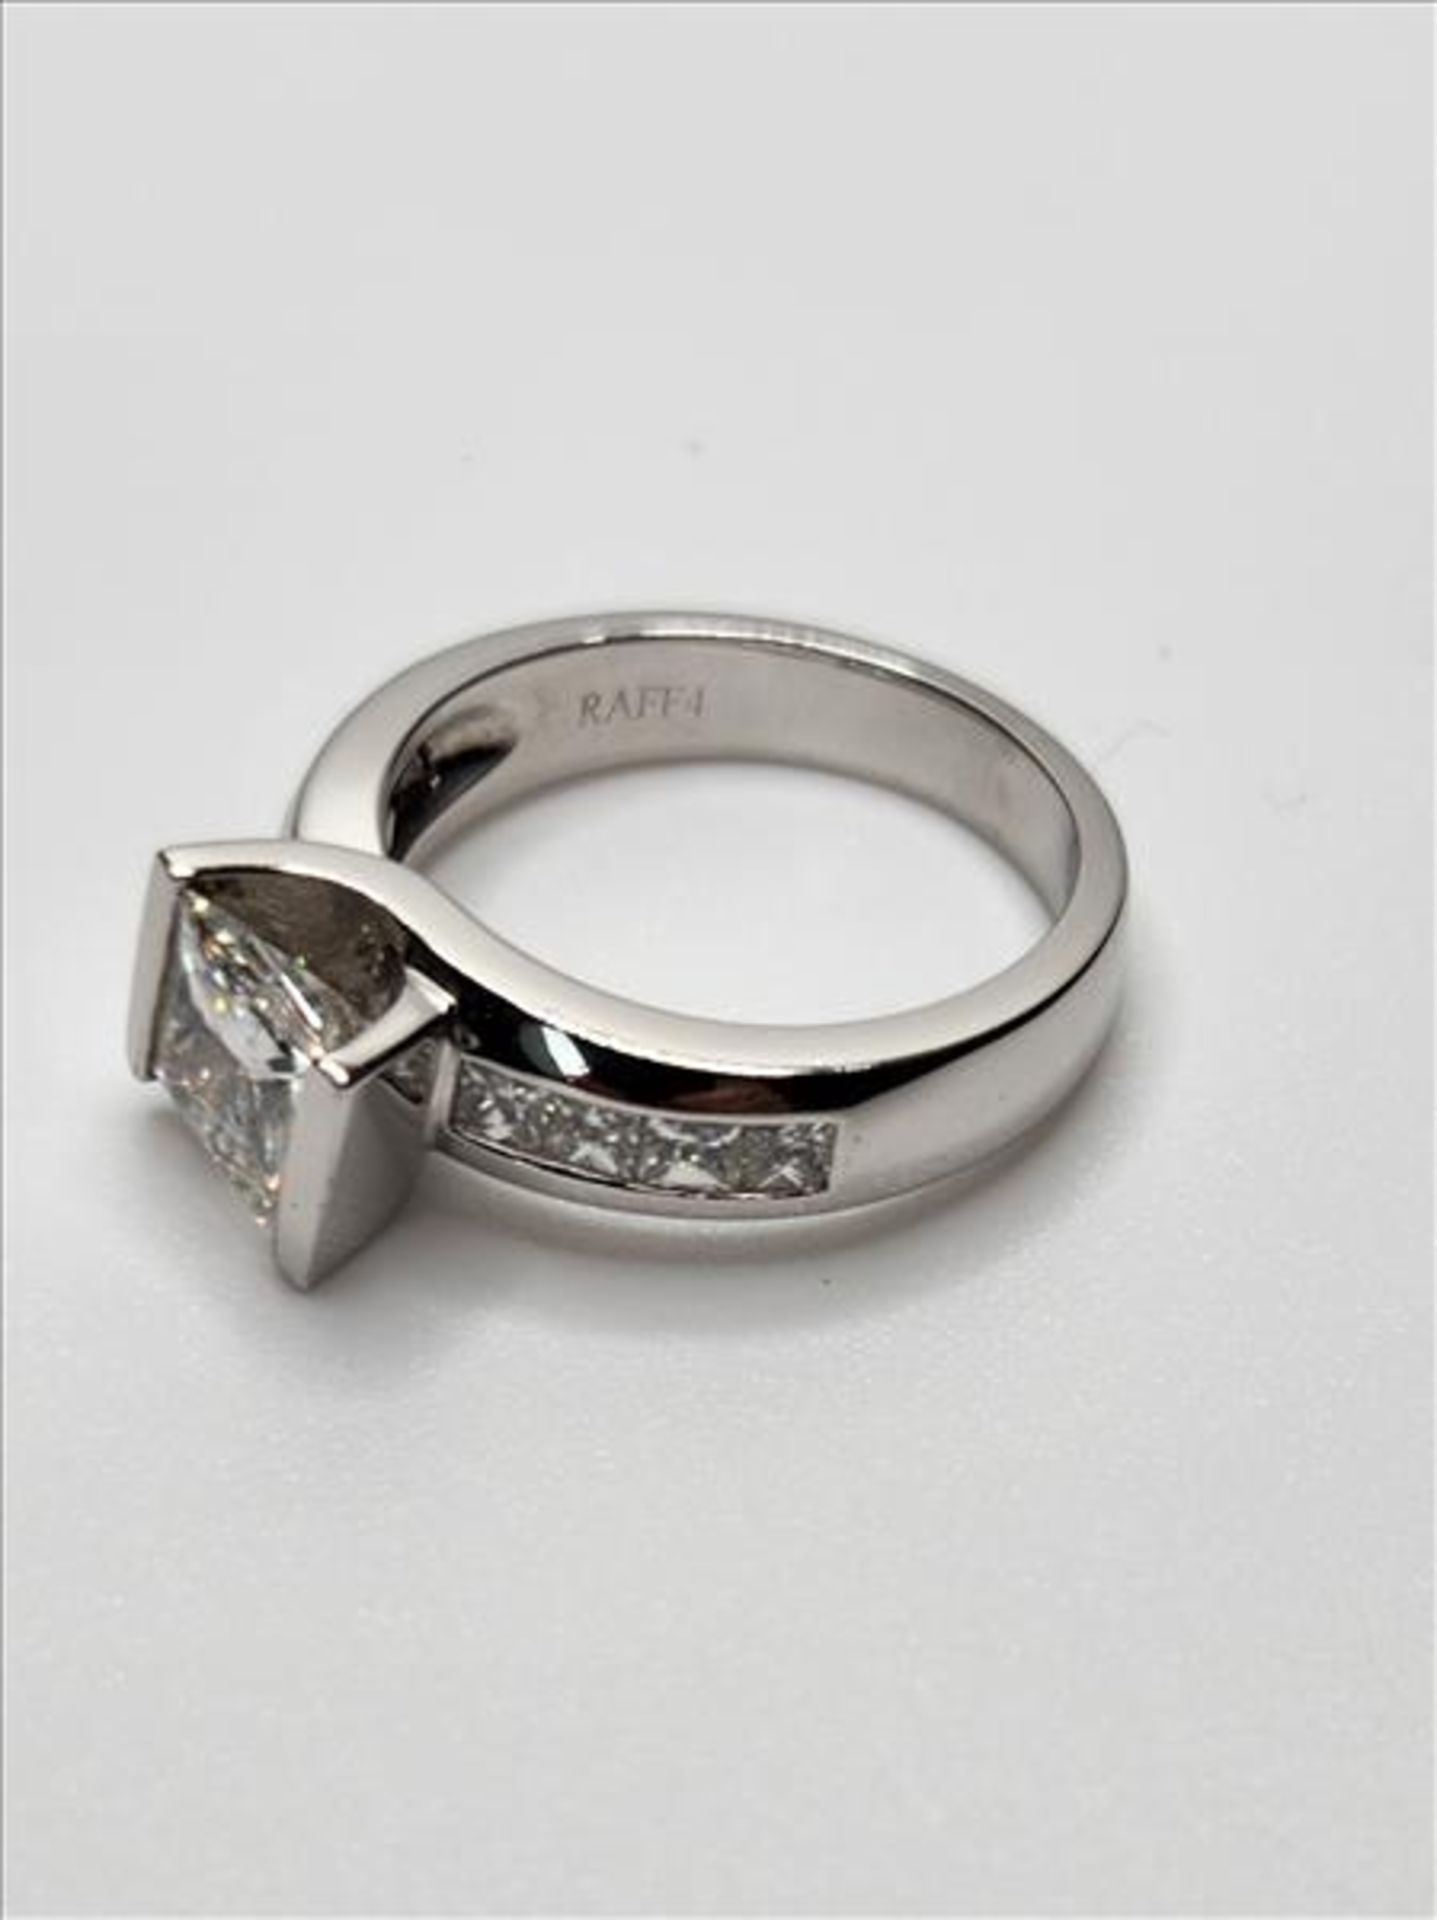 One lady’s stamped RAFP4 and tested 14kt white gold diamond ring by Michael Hill. Contained at the - Image 4 of 7